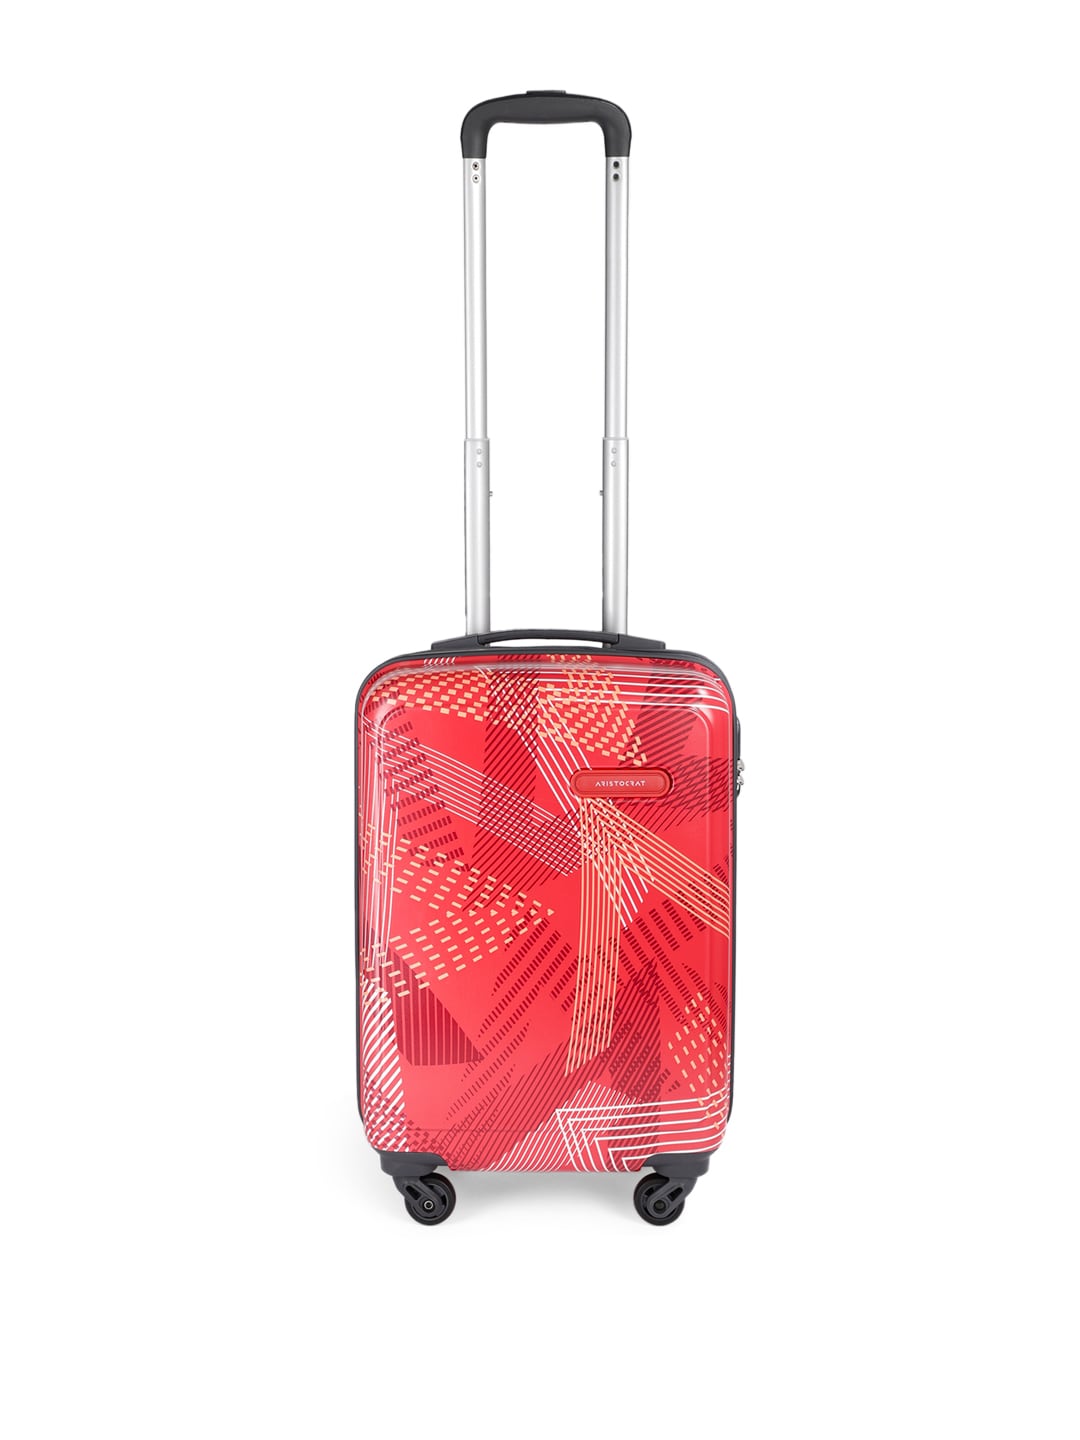 Aristocrat Red Printed DUAL EDGE 55 Cabin Trolley Suitcase Price in India